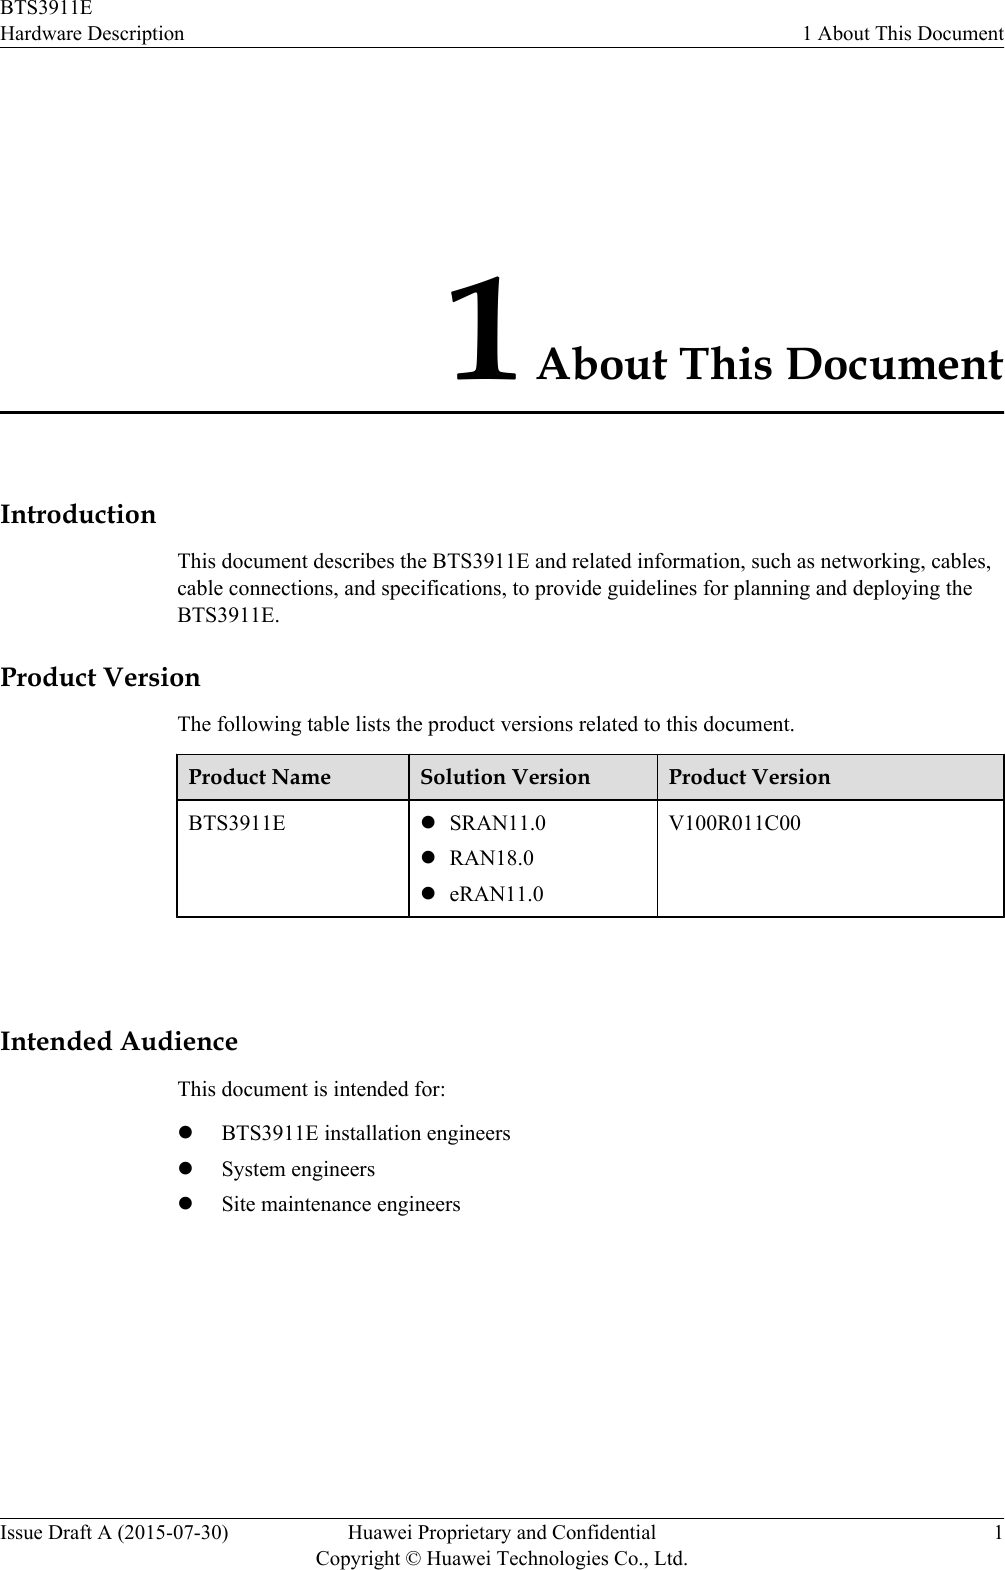 1 About This DocumentIntroductionThis document describes the BTS3911E and related information, such as networking, cables,cable connections, and specifications, to provide guidelines for planning and deploying theBTS3911E.Product VersionThe following table lists the product versions related to this document.Product Name Solution Version Product VersionBTS3911E lSRAN11.0lRAN18.0leRAN11.0V100R011C00 Intended AudienceThis document is intended for:lBTS3911E installation engineerslSystem engineerslSite maintenance engineersBTS3911EHardware Description 1 About This DocumentIssue Draft A (2015-07-30) Huawei Proprietary and ConfidentialCopyright © Huawei Technologies Co., Ltd.1